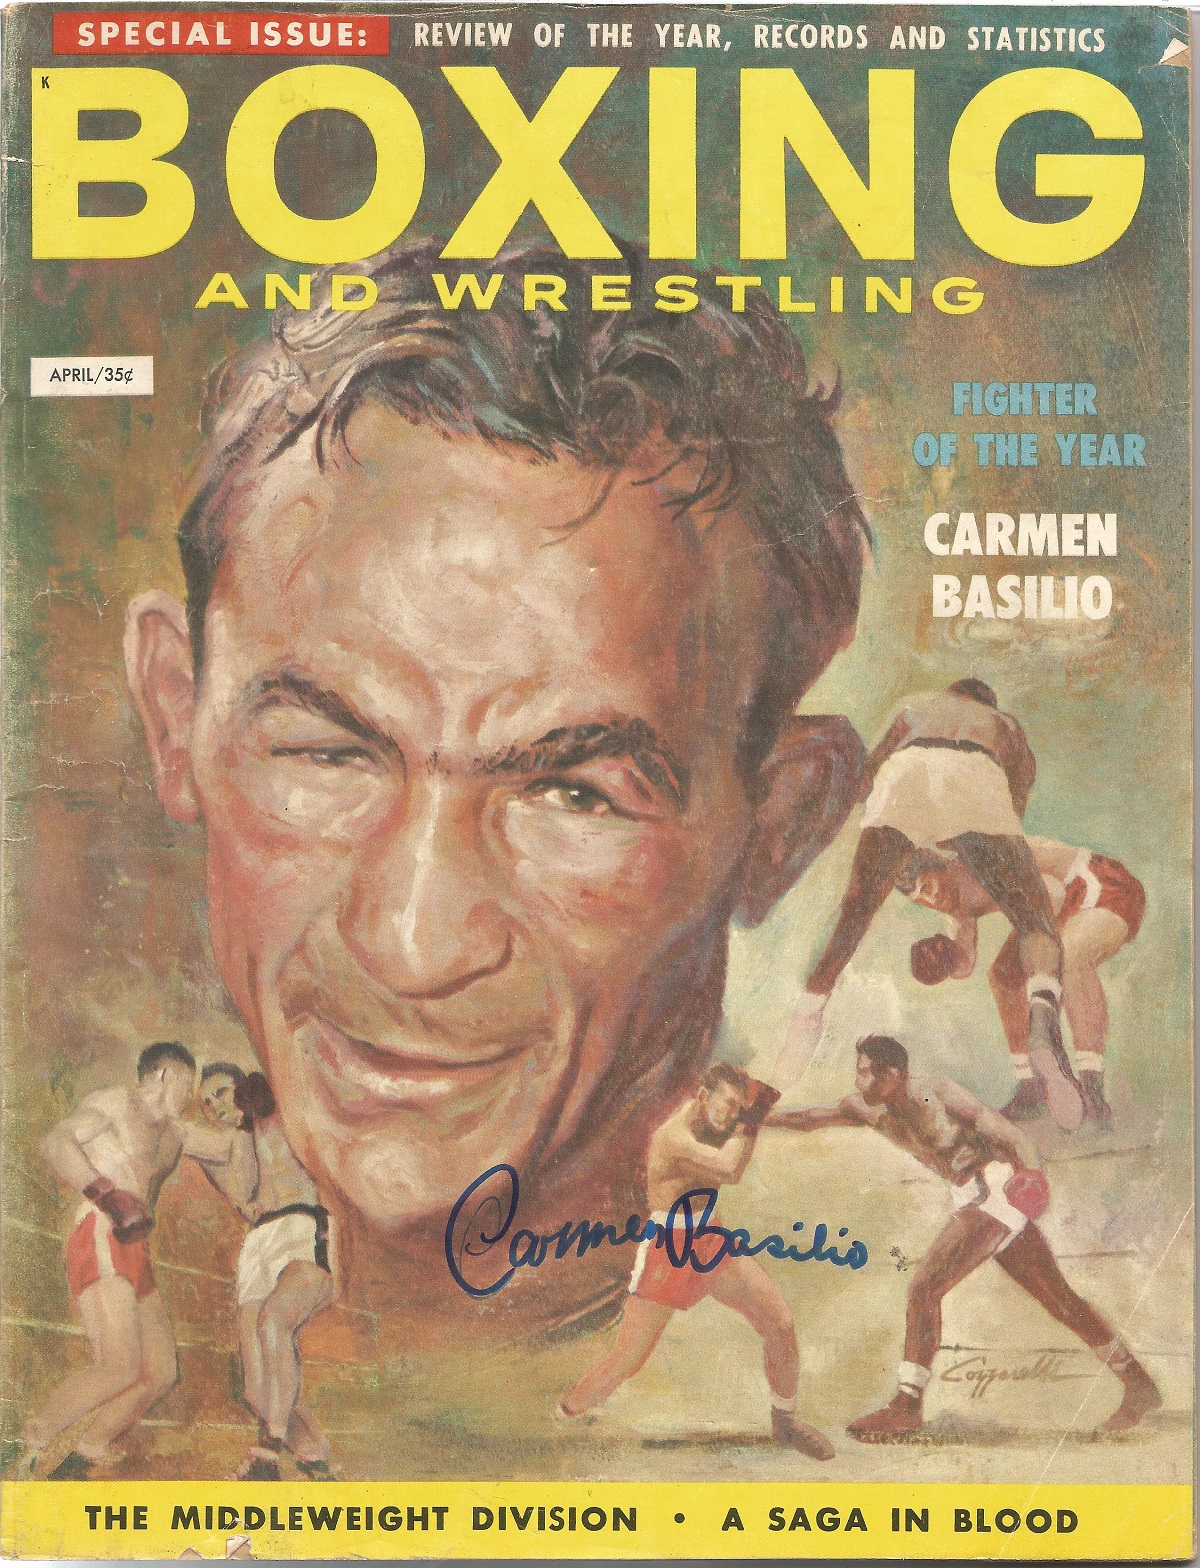 Boxing and Wrestling Magazine 1958 signed by Carmen Basilio. Good condition. All autographs come